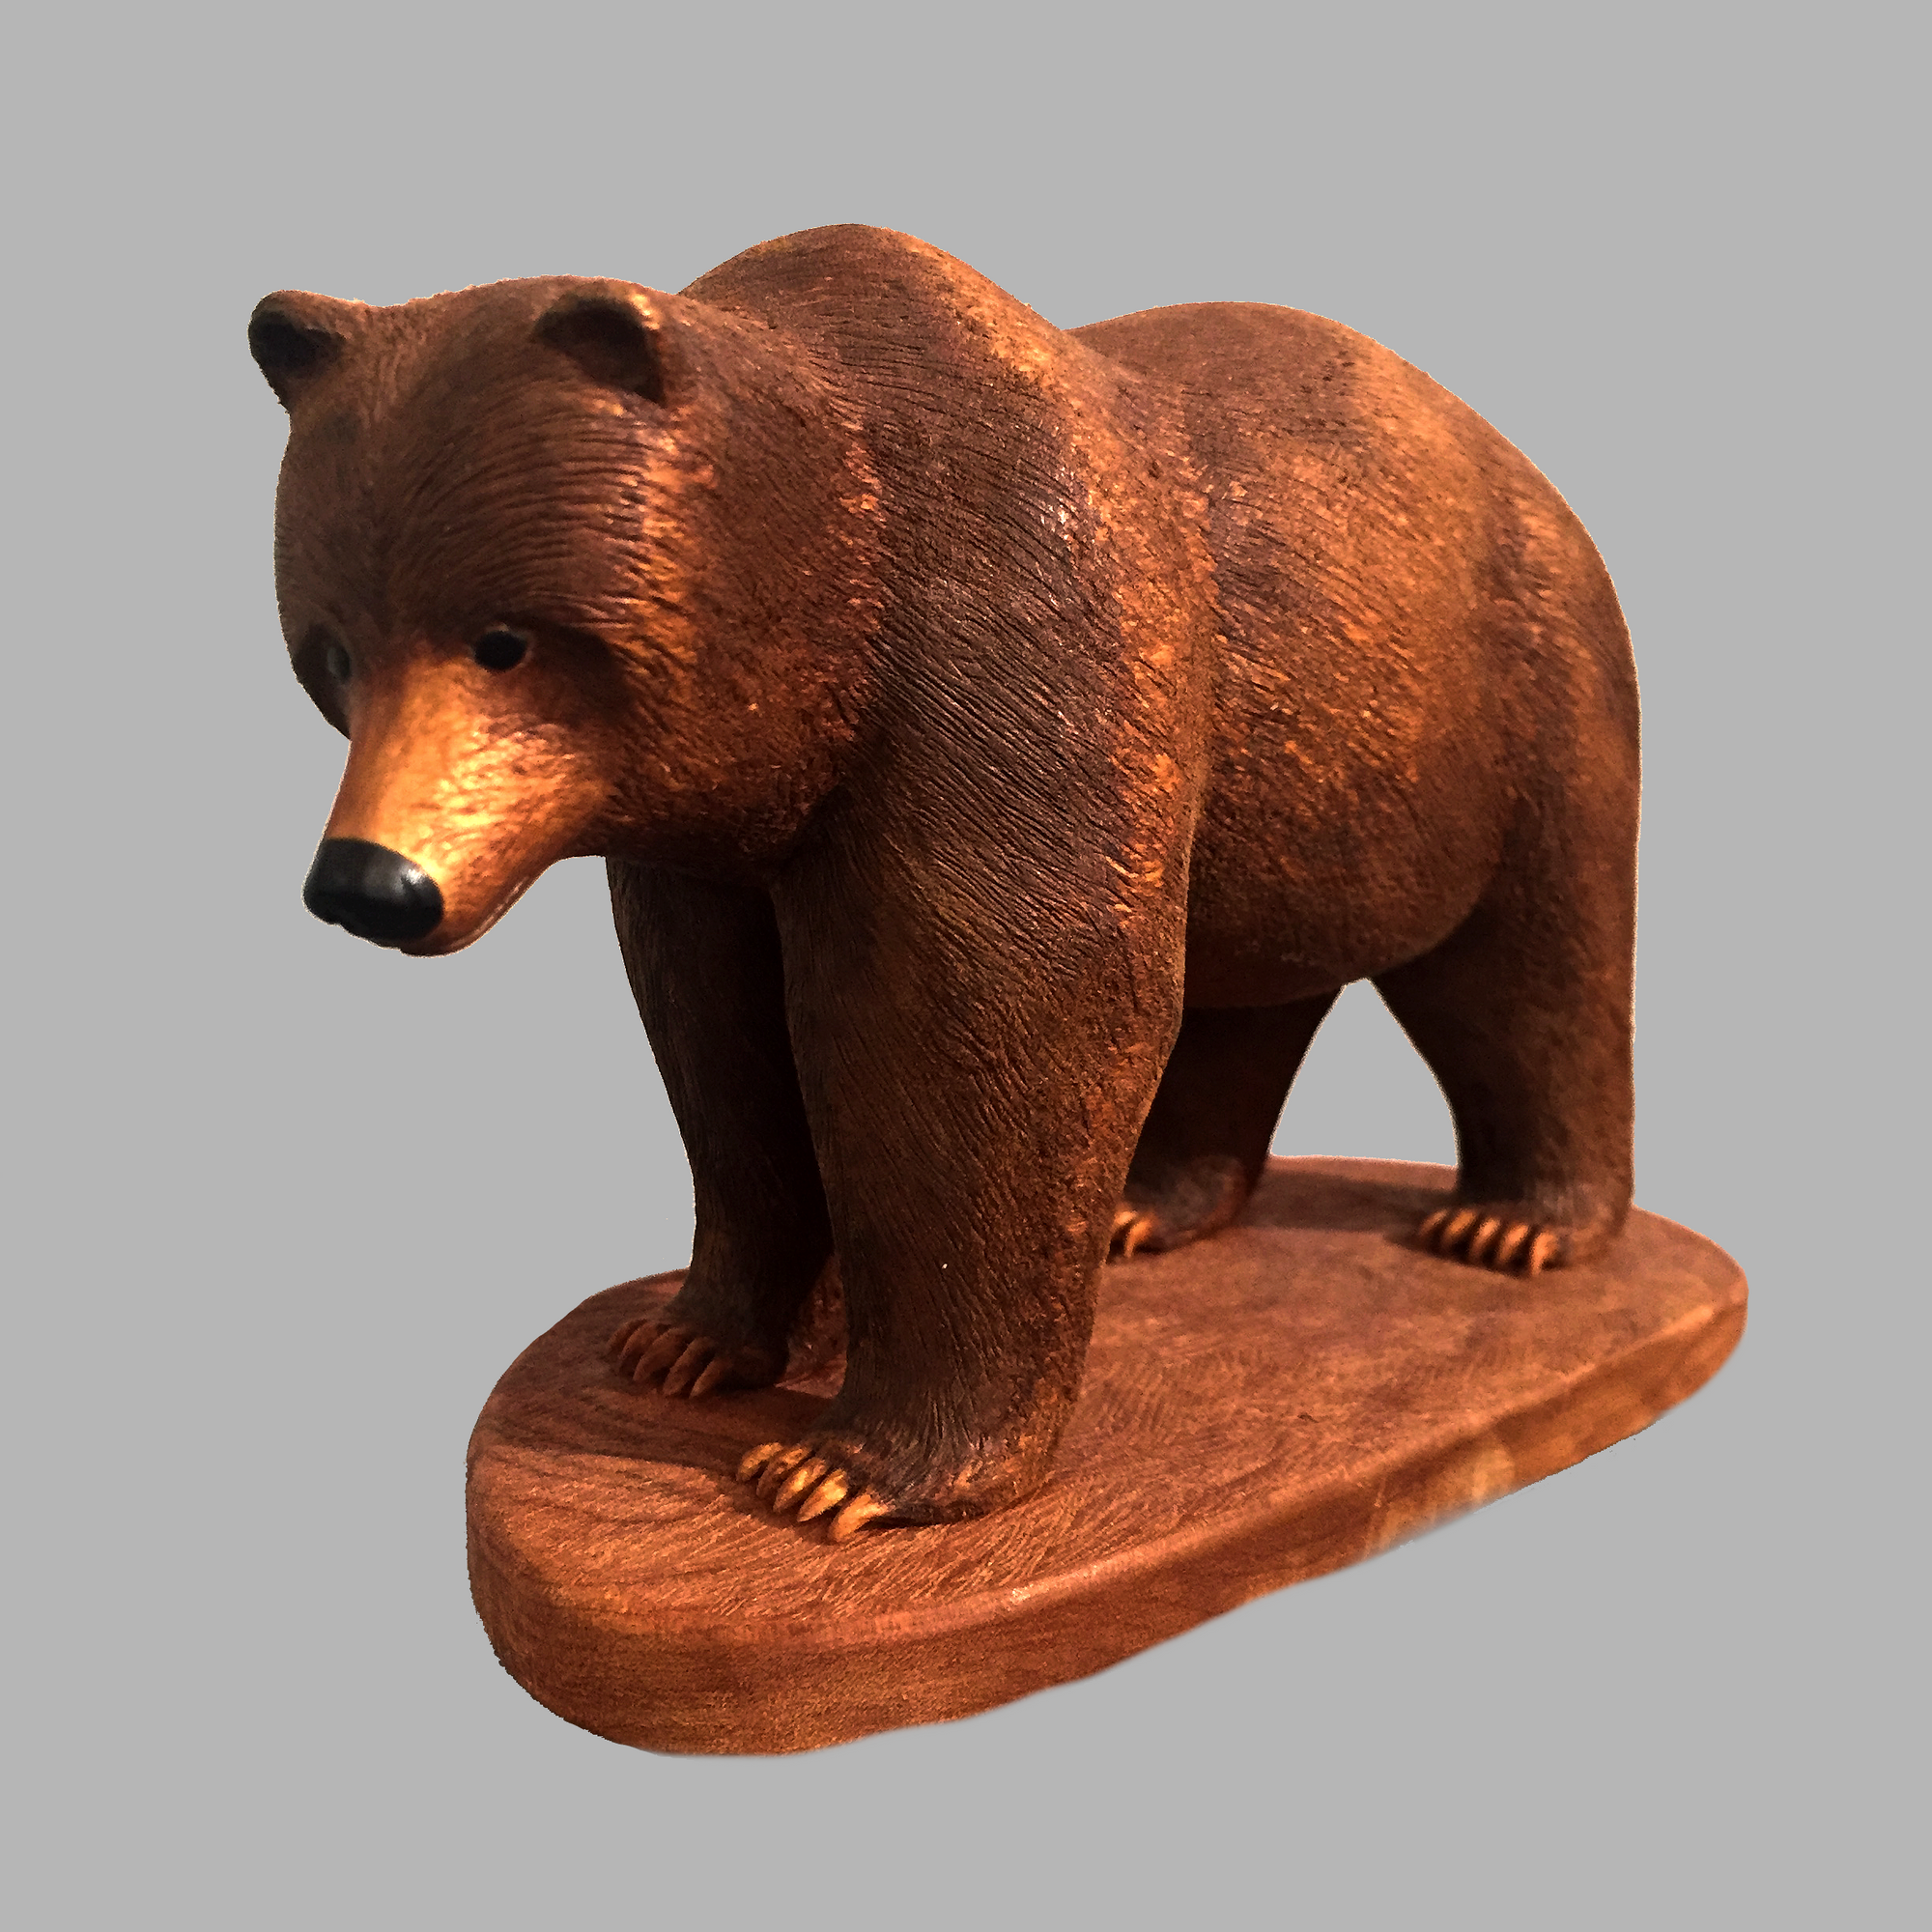 Grizzlyl Minature Animal wood carving by Salt Spring Island artist Jim Dearing